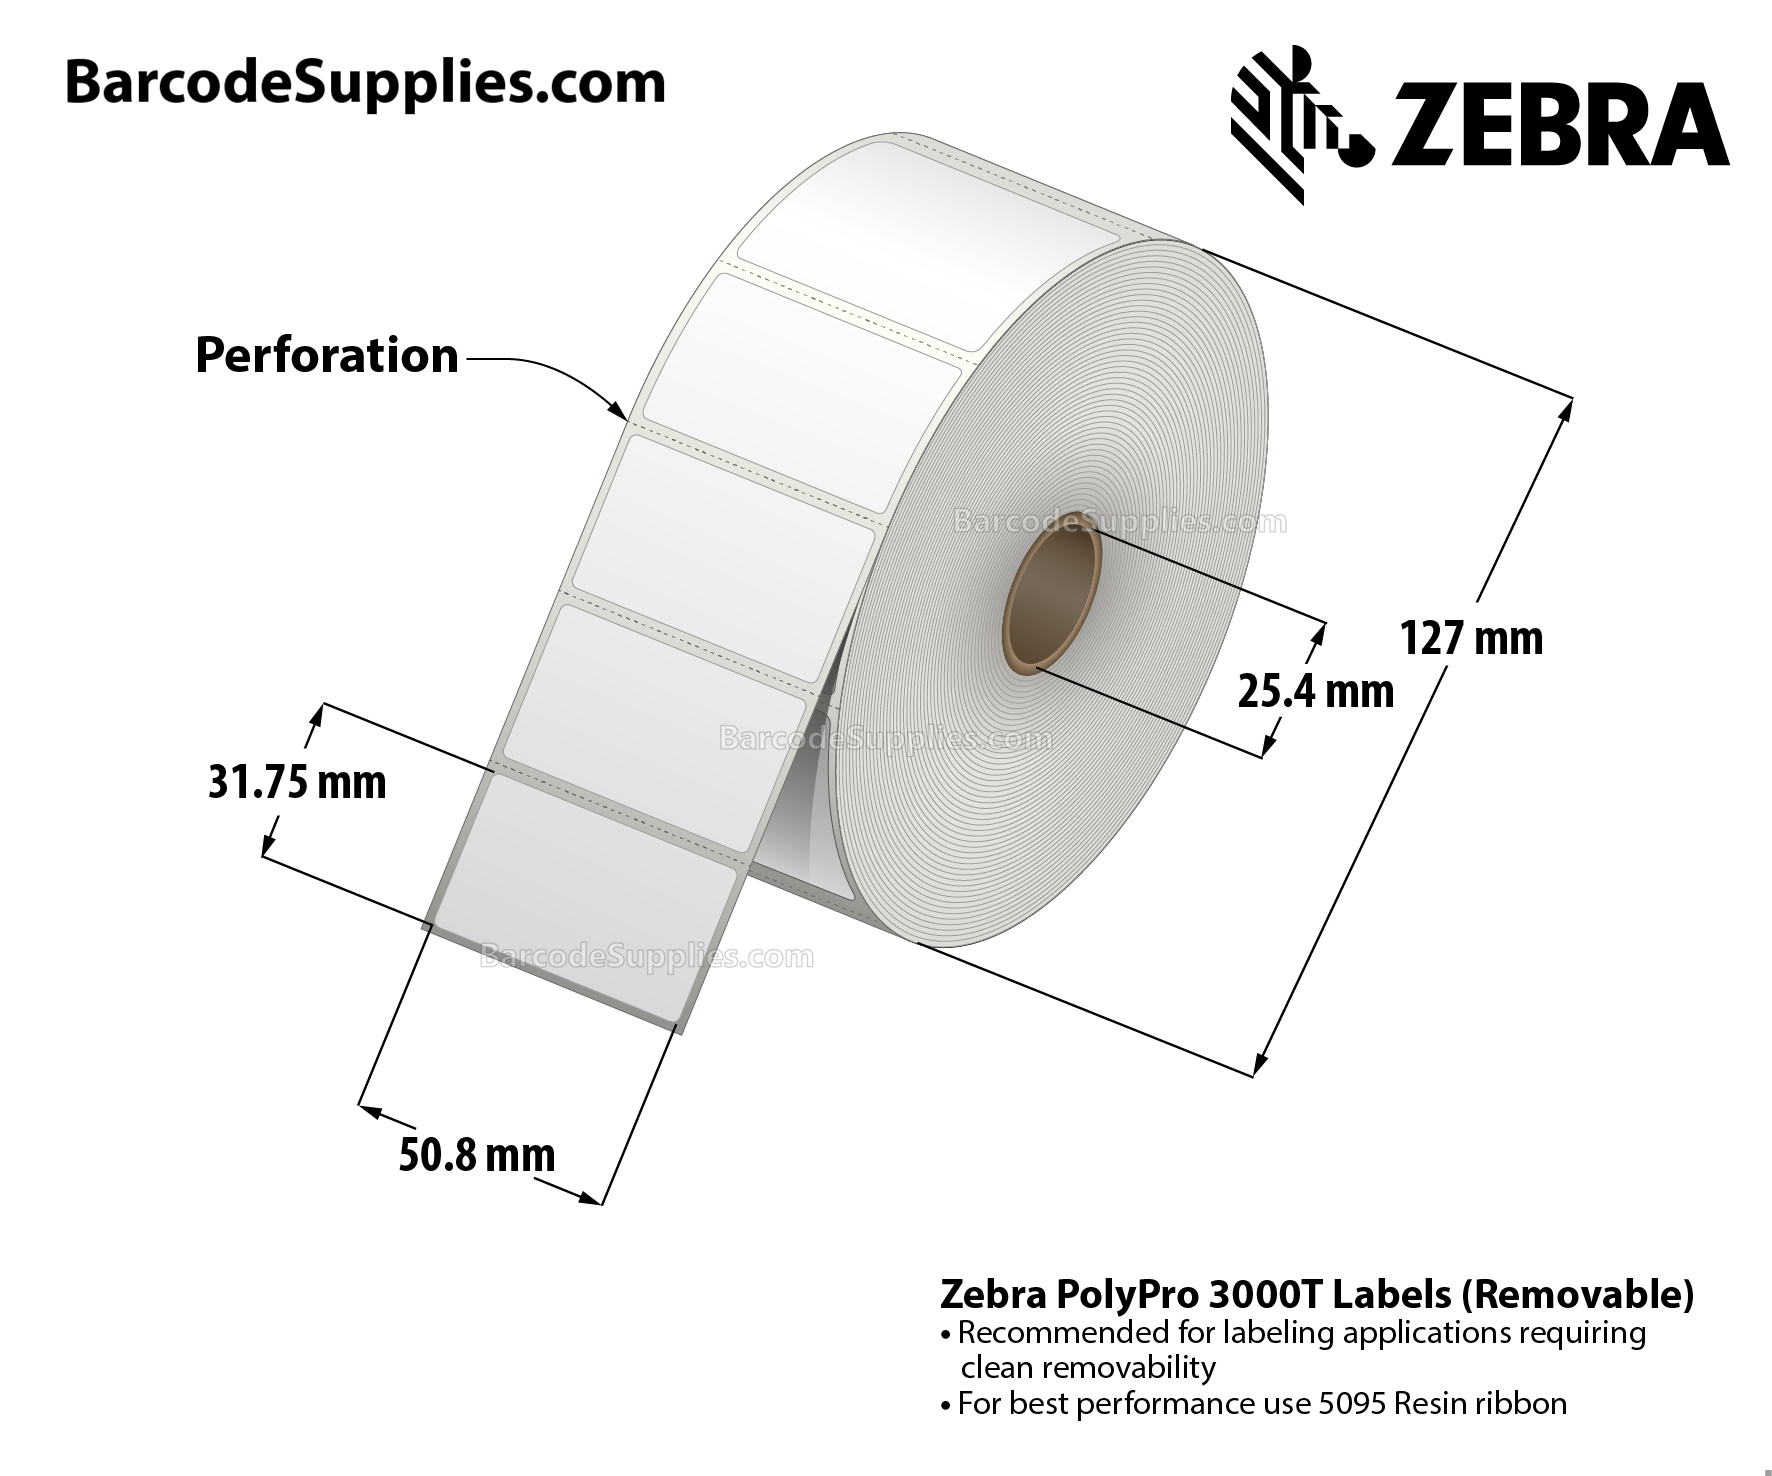 2 x 1.25 Thermal Transfer White PolyPro 3000T Gloss Removable Labels With Removable Adhesive - Perforated - 1410 Labels Per Roll - Carton Of 8 Rolls - 11280 Labels Total - MPN: 10032211